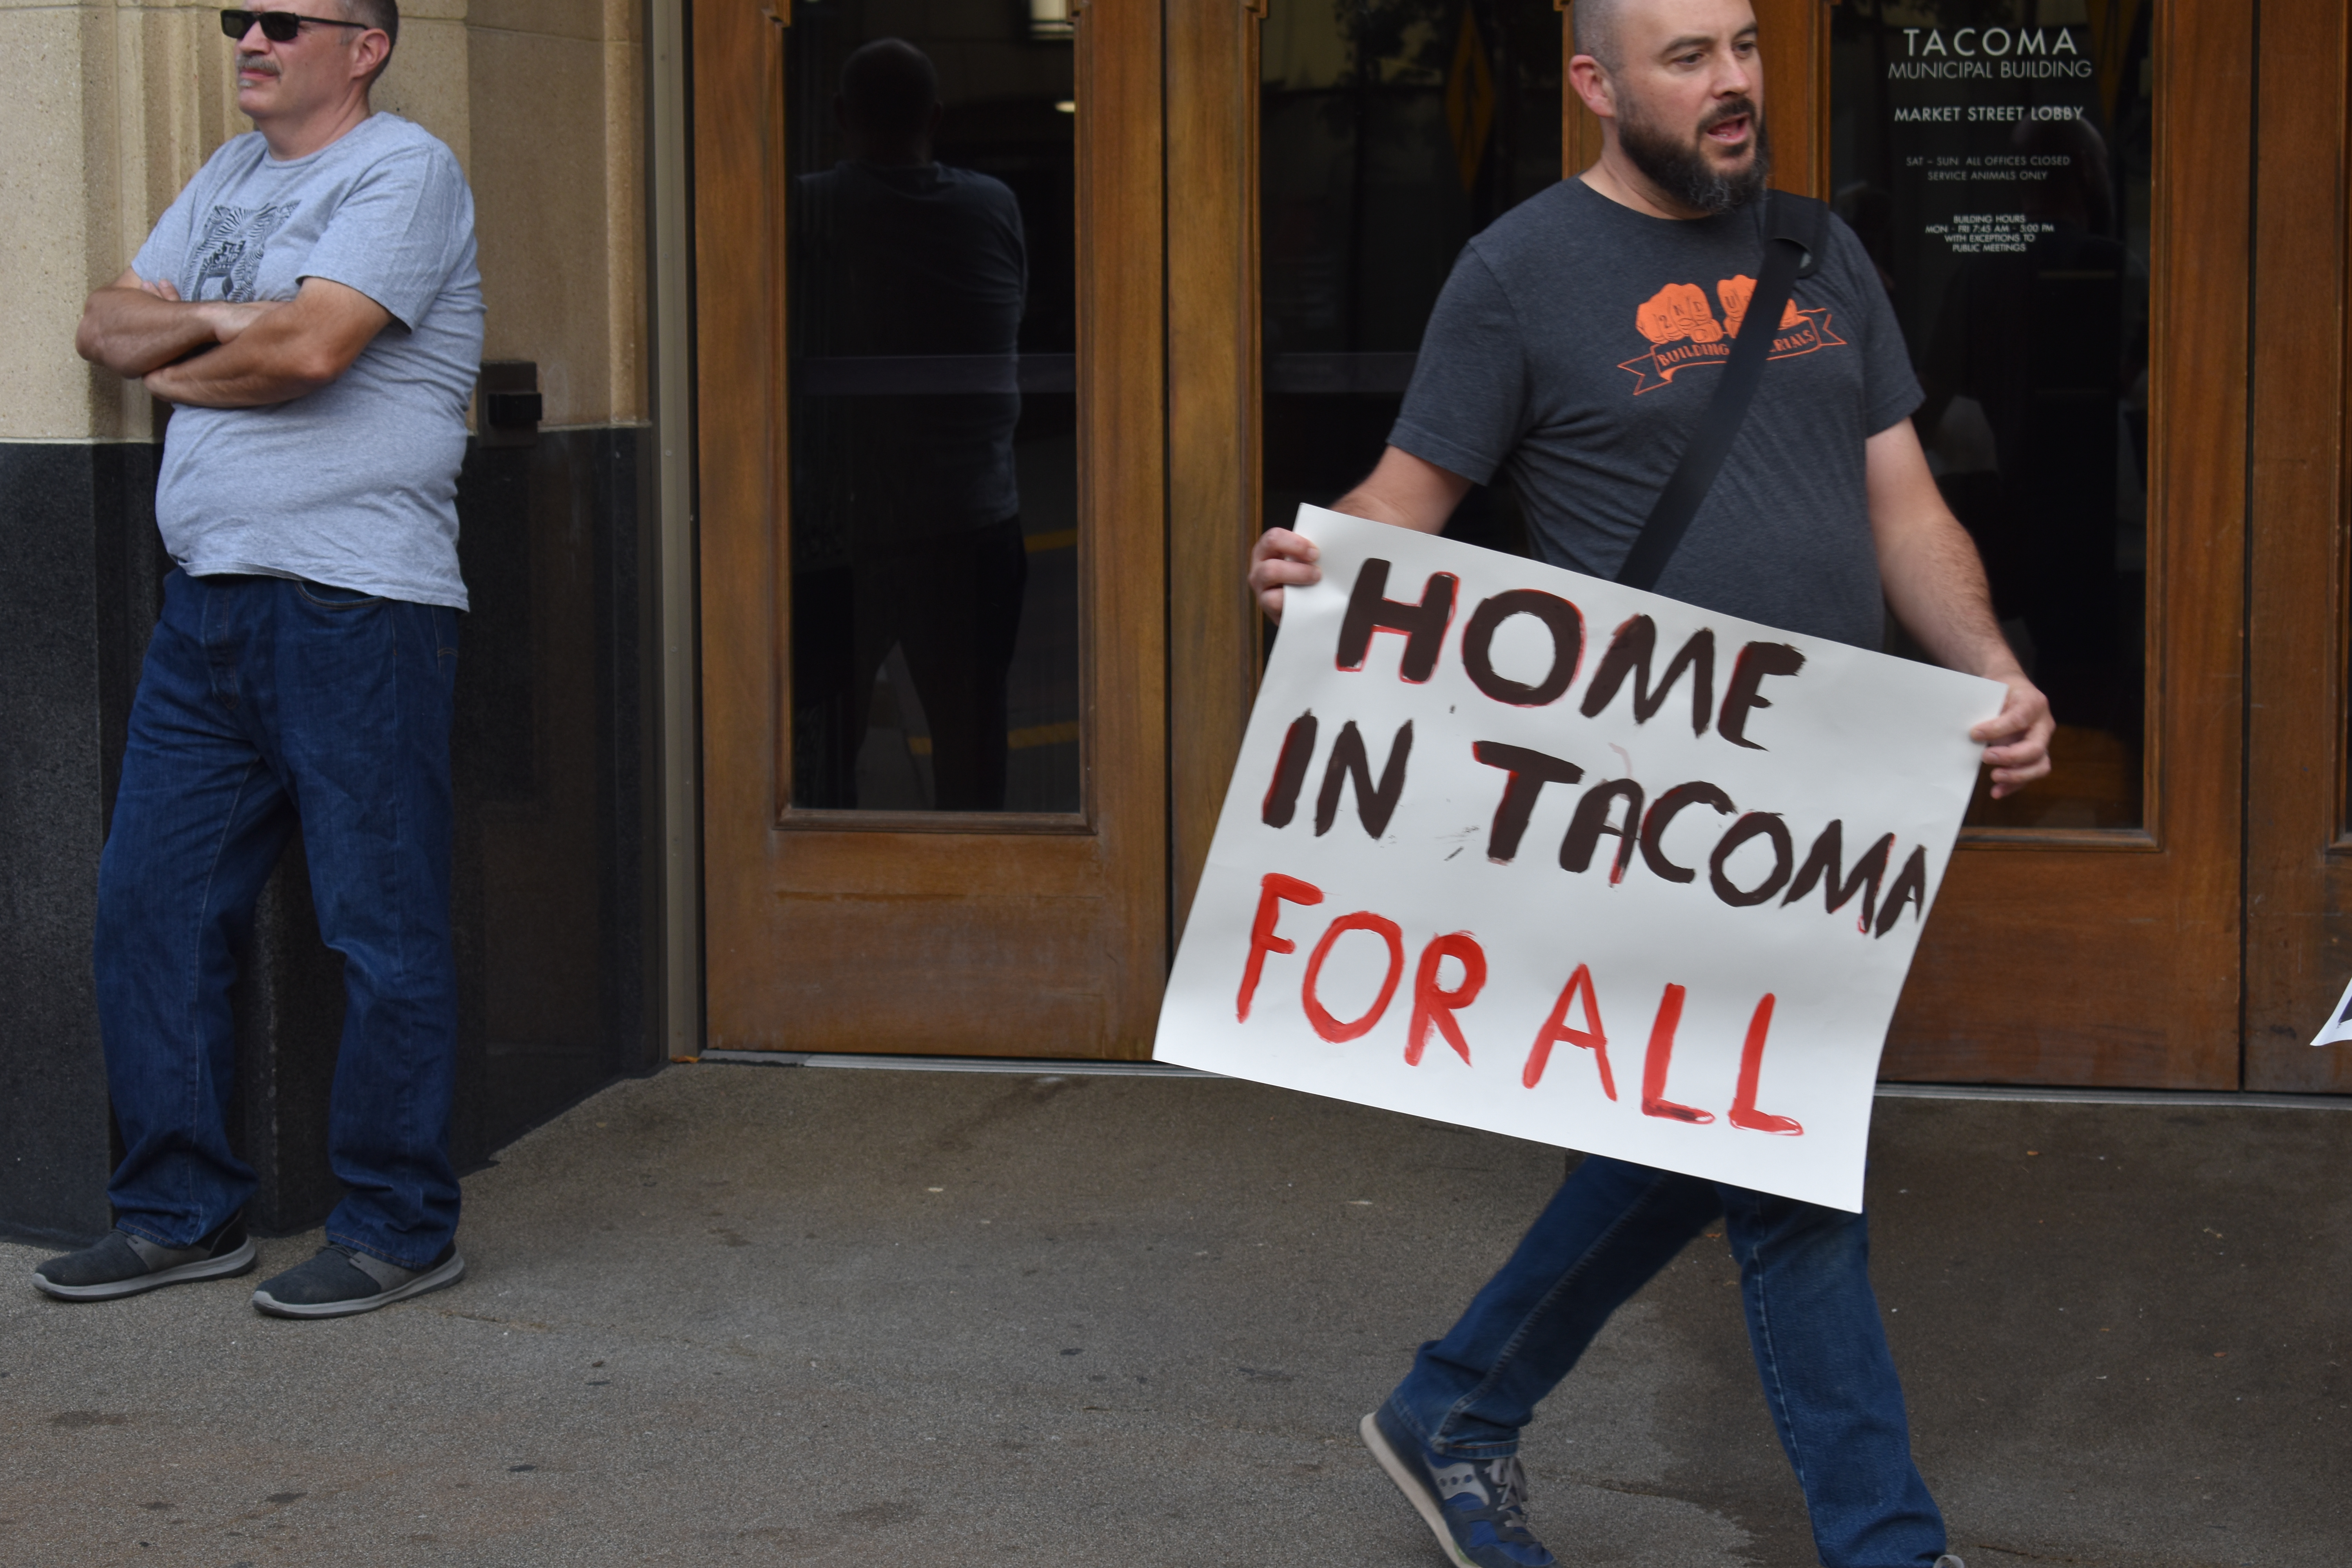 Ty Moore, with the Tacoma & Pierce County Democratic Socialists of America, holds a sign in support of Home in Tacoma For All at a rally for housing justice outside the city municipal building. Photo by Lauren Gallup.